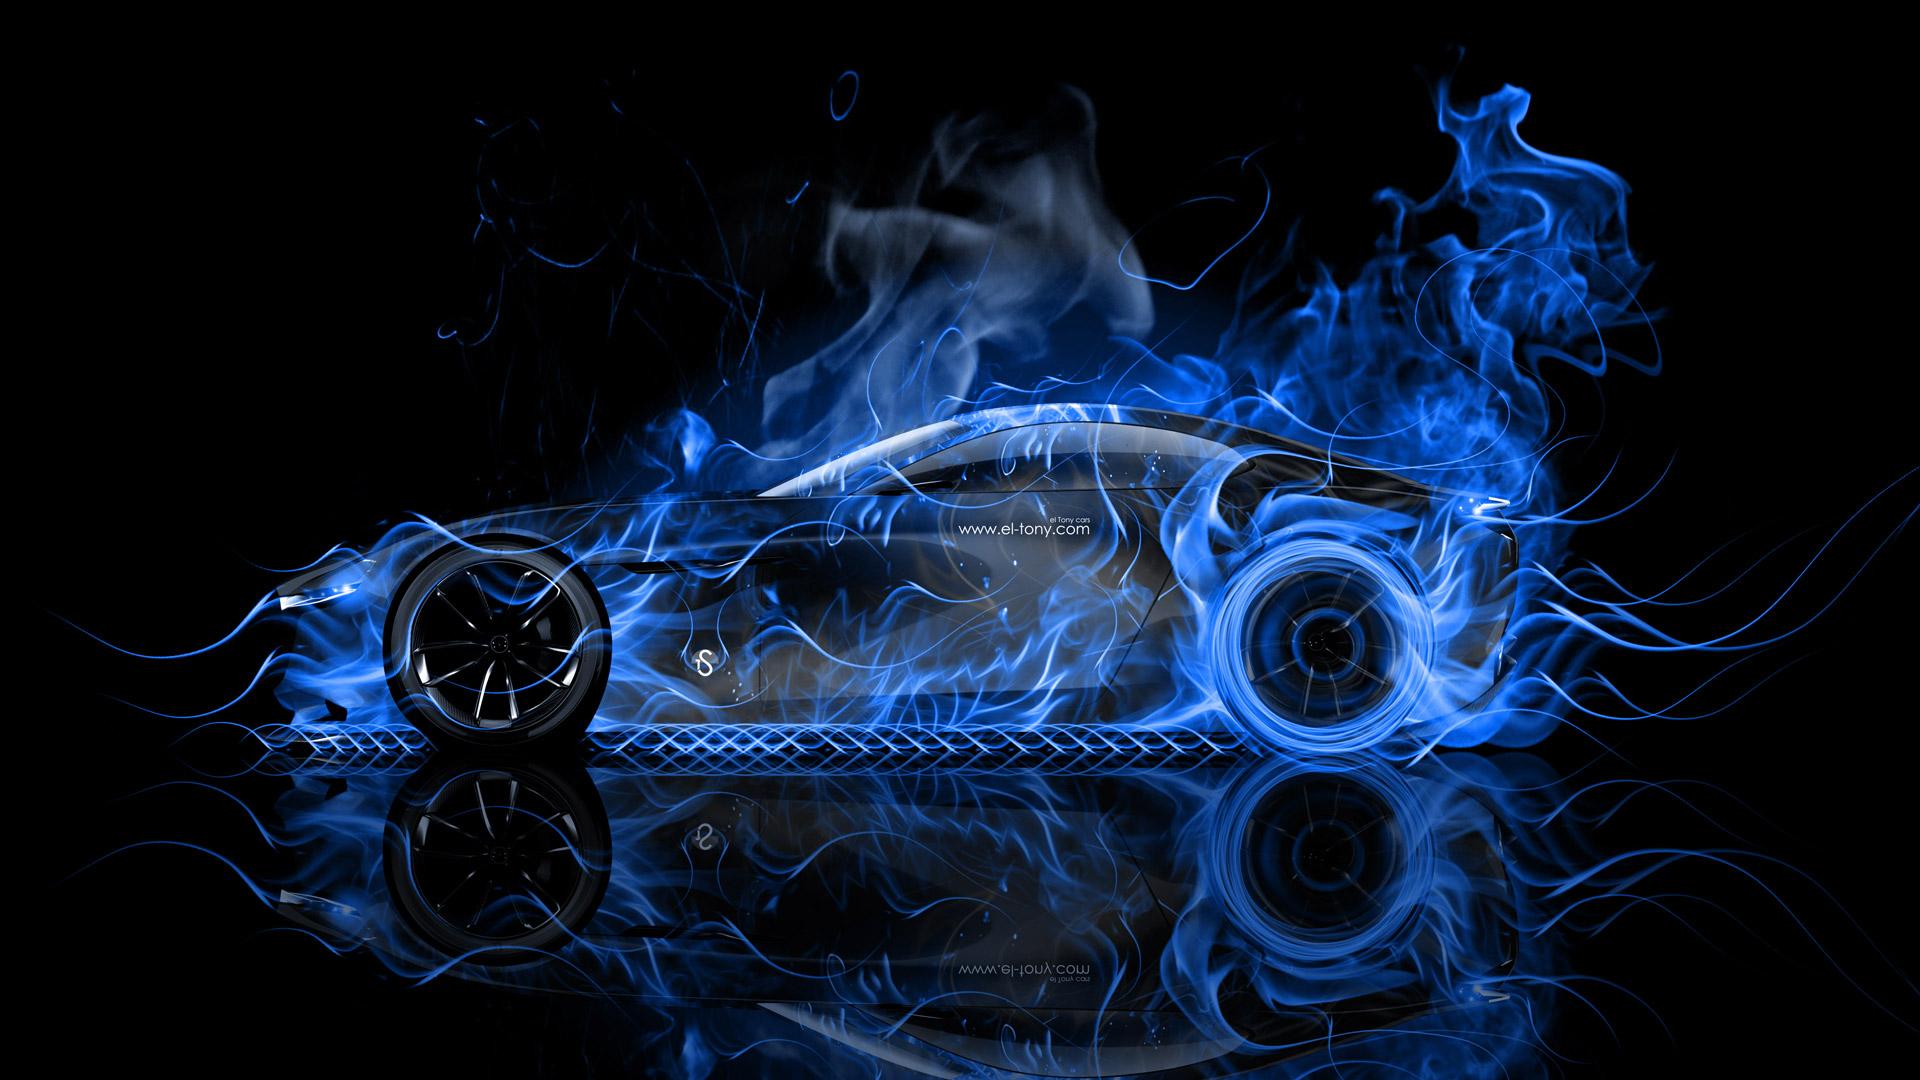 Blue and Black Car Wallpapers - Top Free Blue and Black Car Backgrounds ...